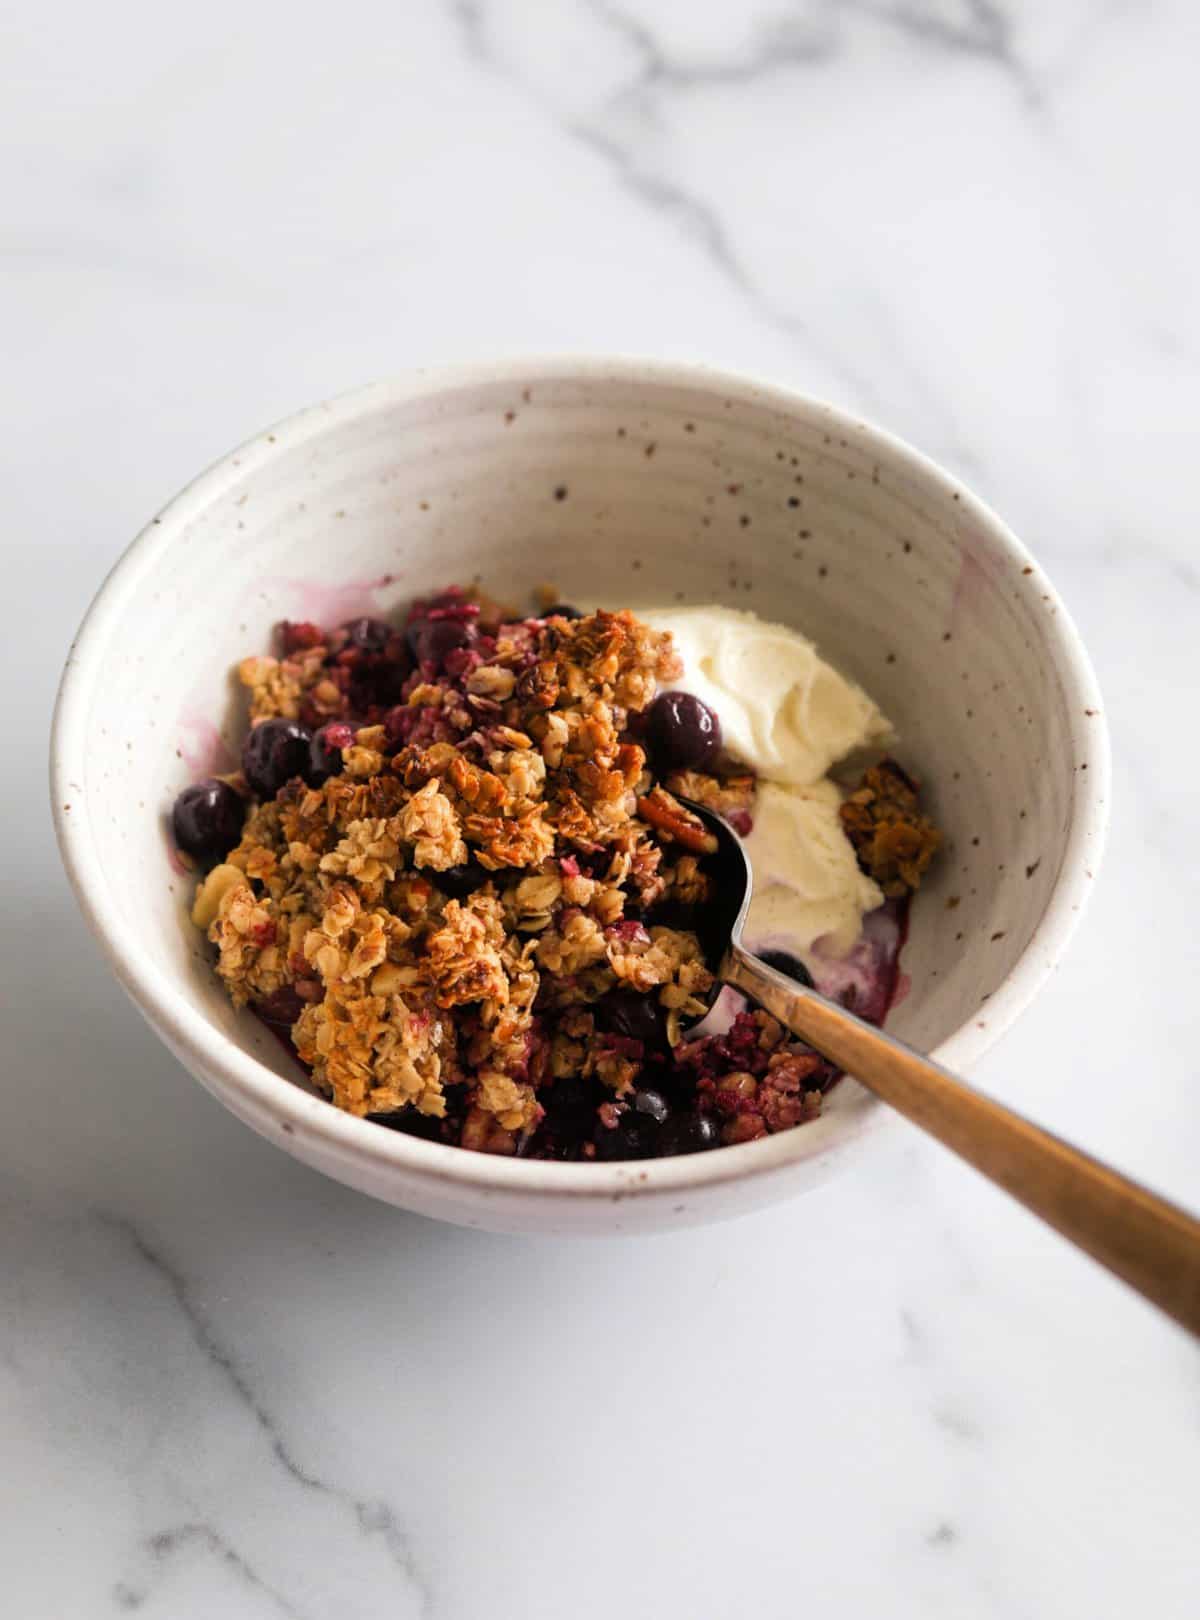 A side shot of a bowl of blueberry crumble and ice cream.